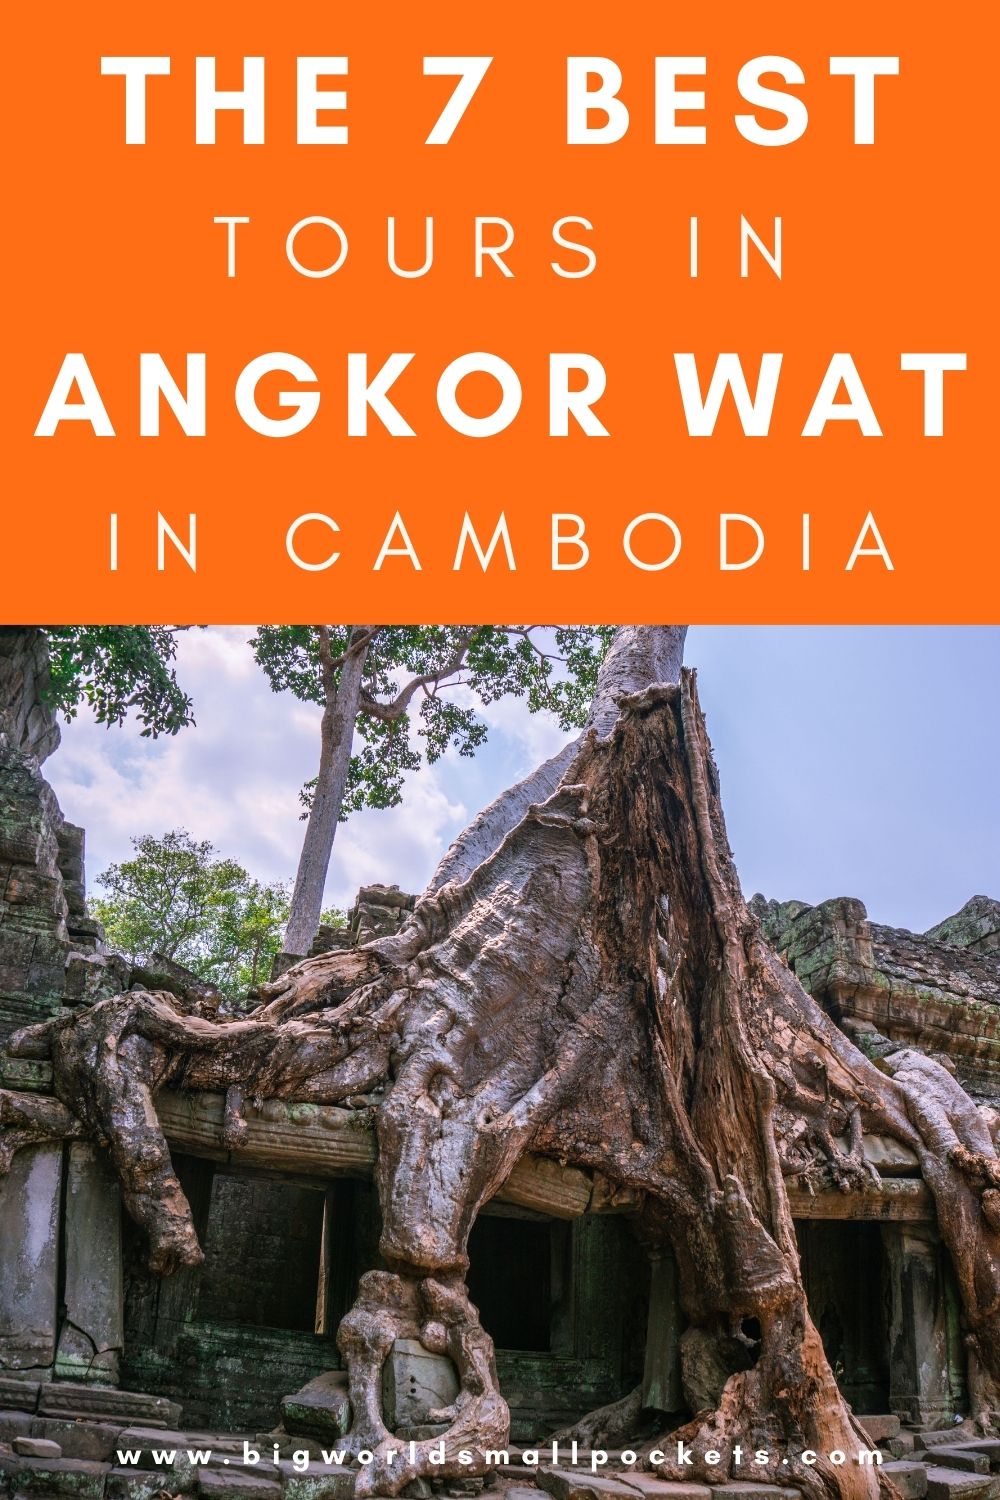 The 7 Best Angkor Wat Tours in Cambodia